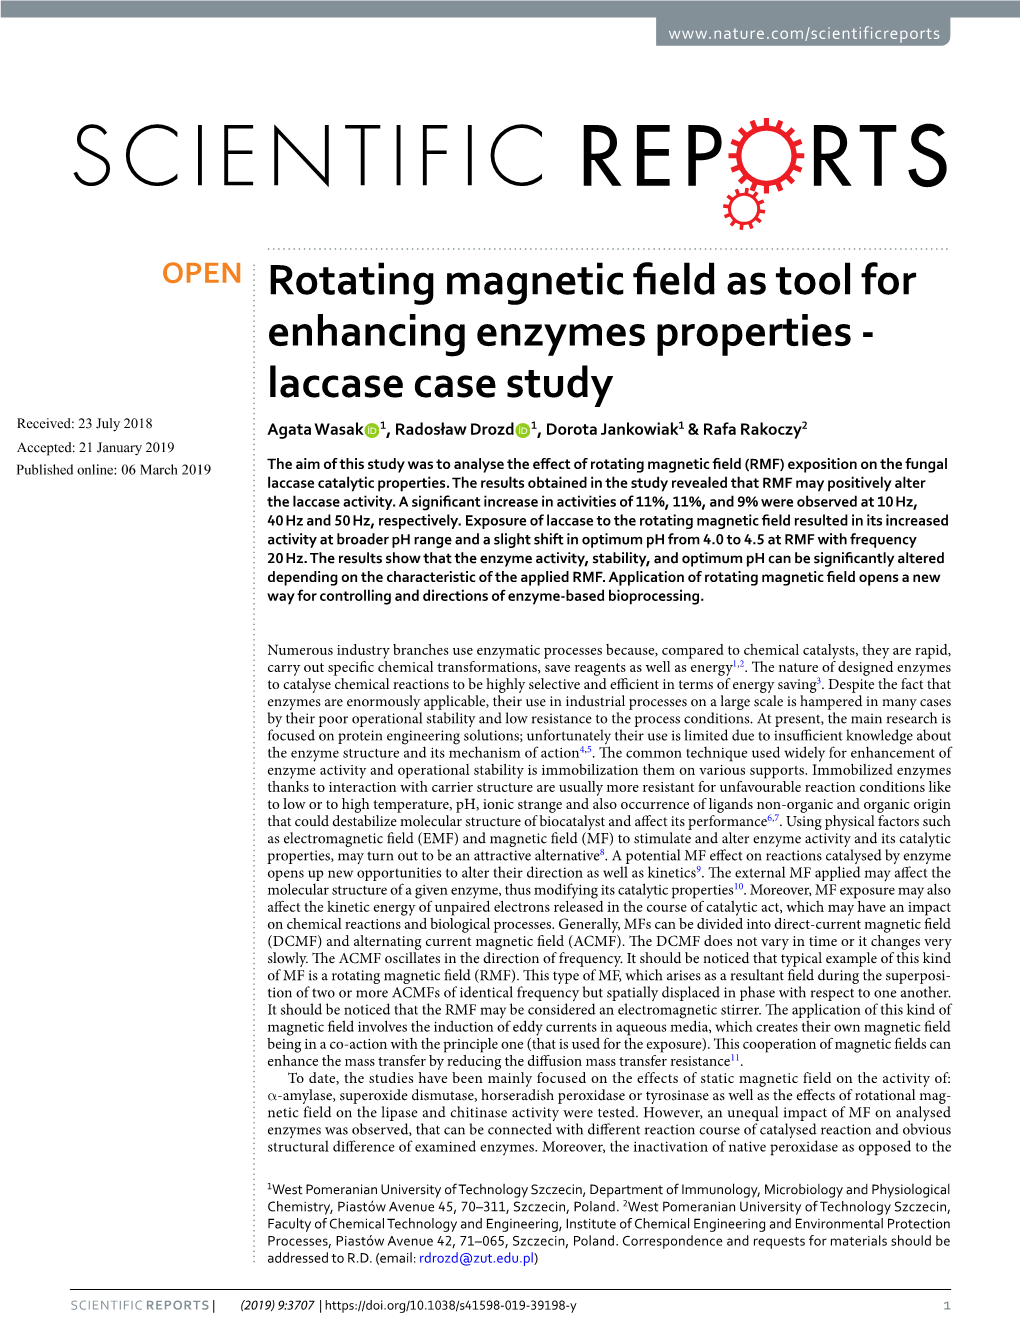 Rotating Magnetic Field As Tool for Enhancing Enzymes Properties